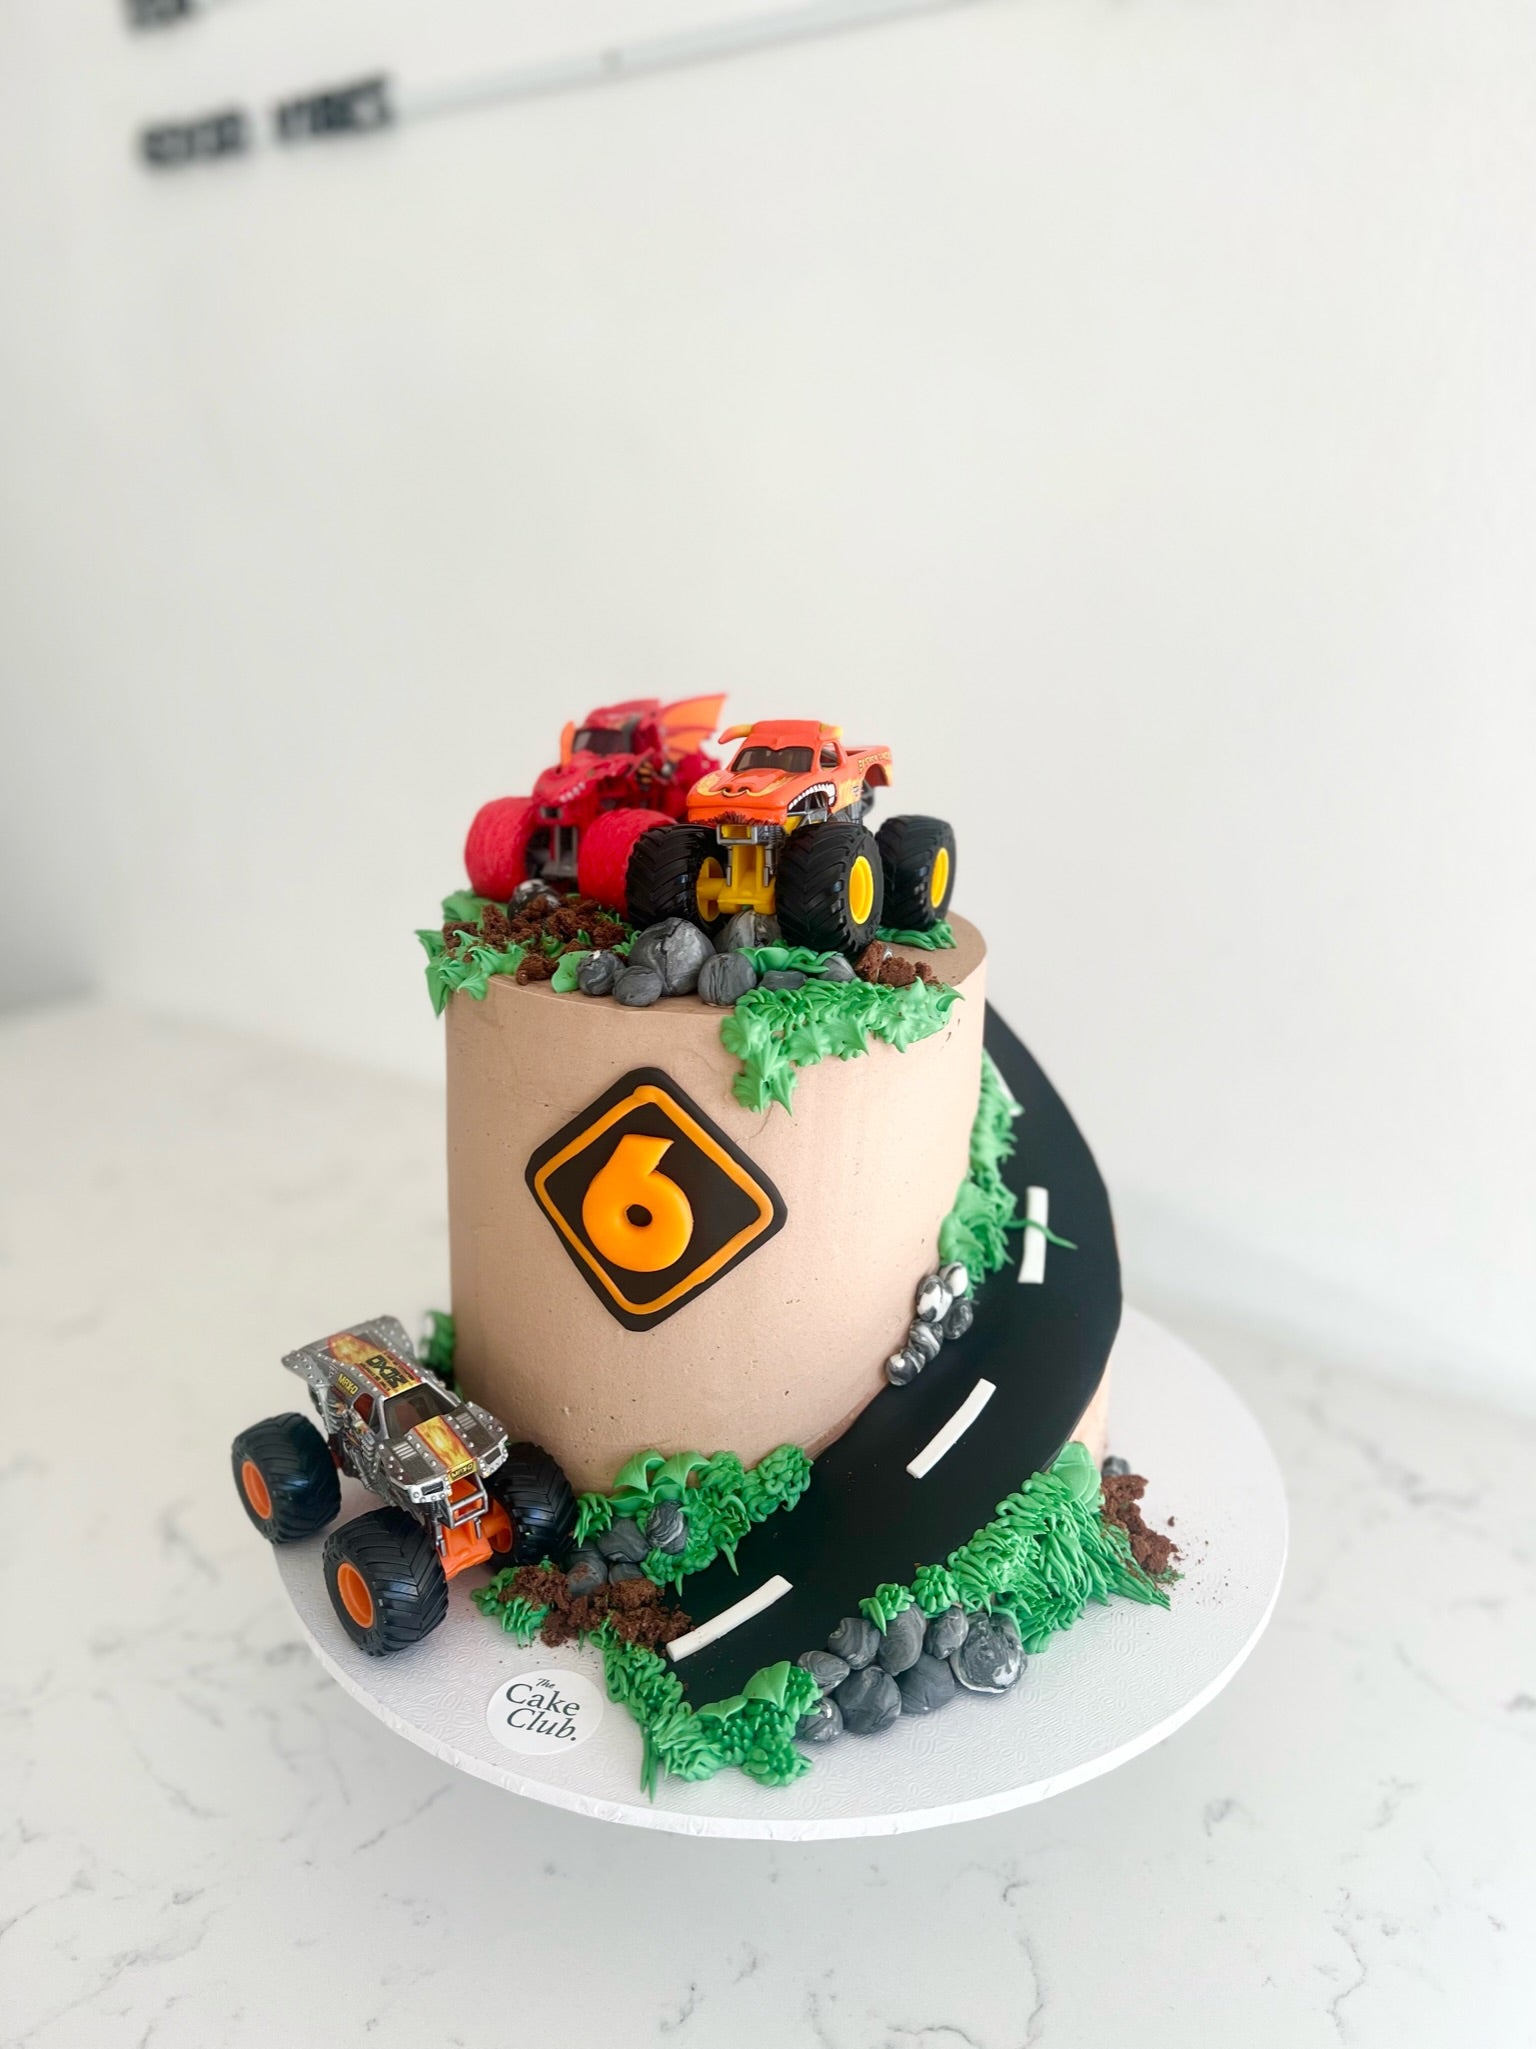 Truck Cake for 2nd Birthday - A Decorating Tutorial | Truck birthday cakes, Birthday  cake kids, Cake decorating for kids